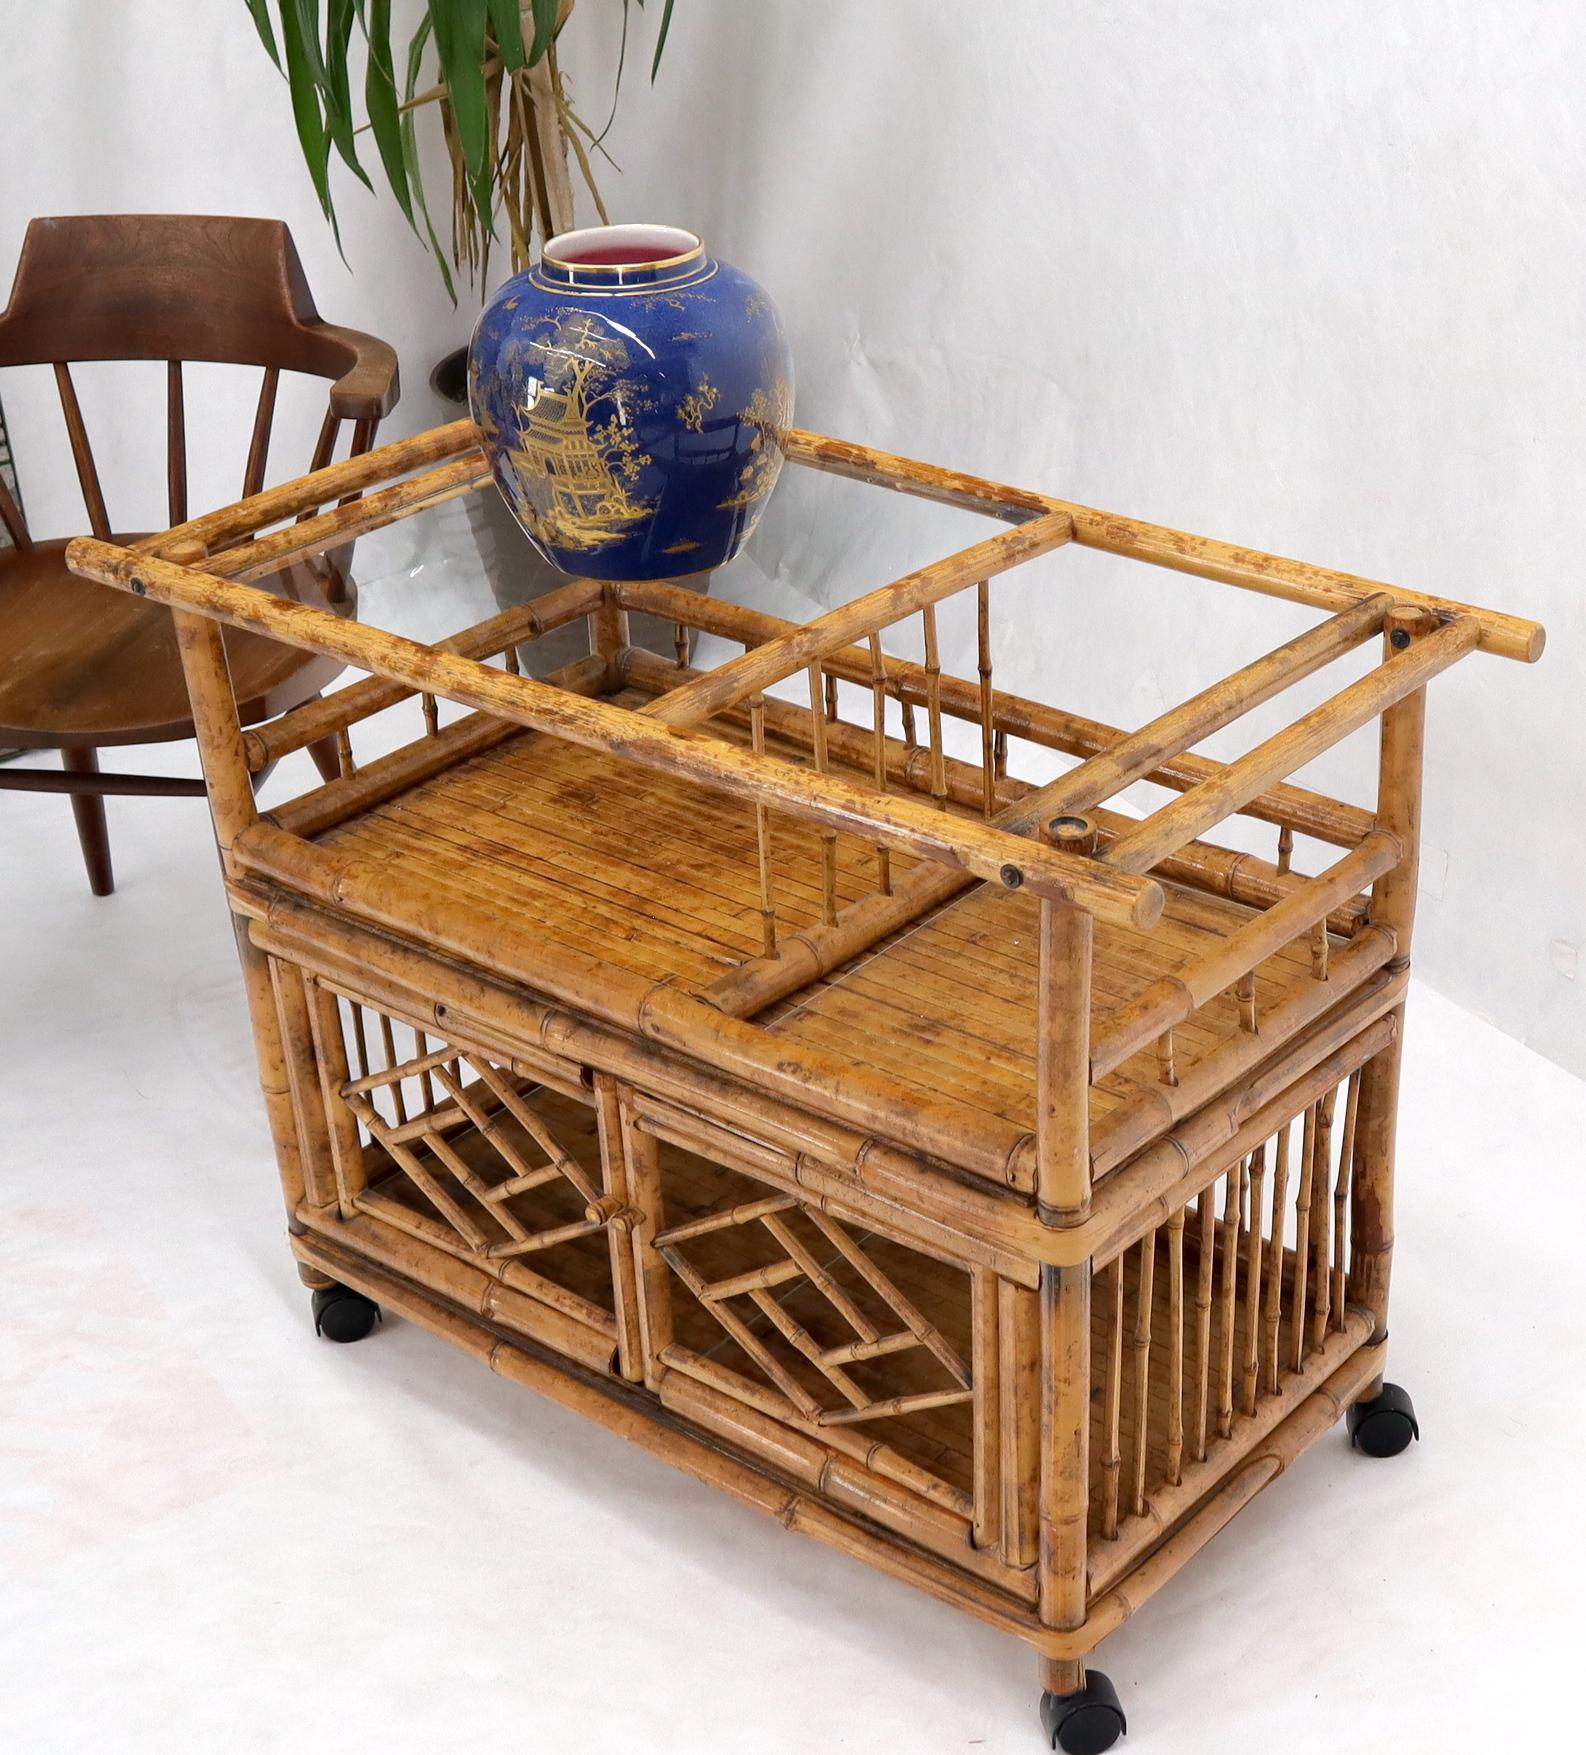 Mid-Century Modern decorative bamboo and glass serving bar cart on wheels with two doors compartment.